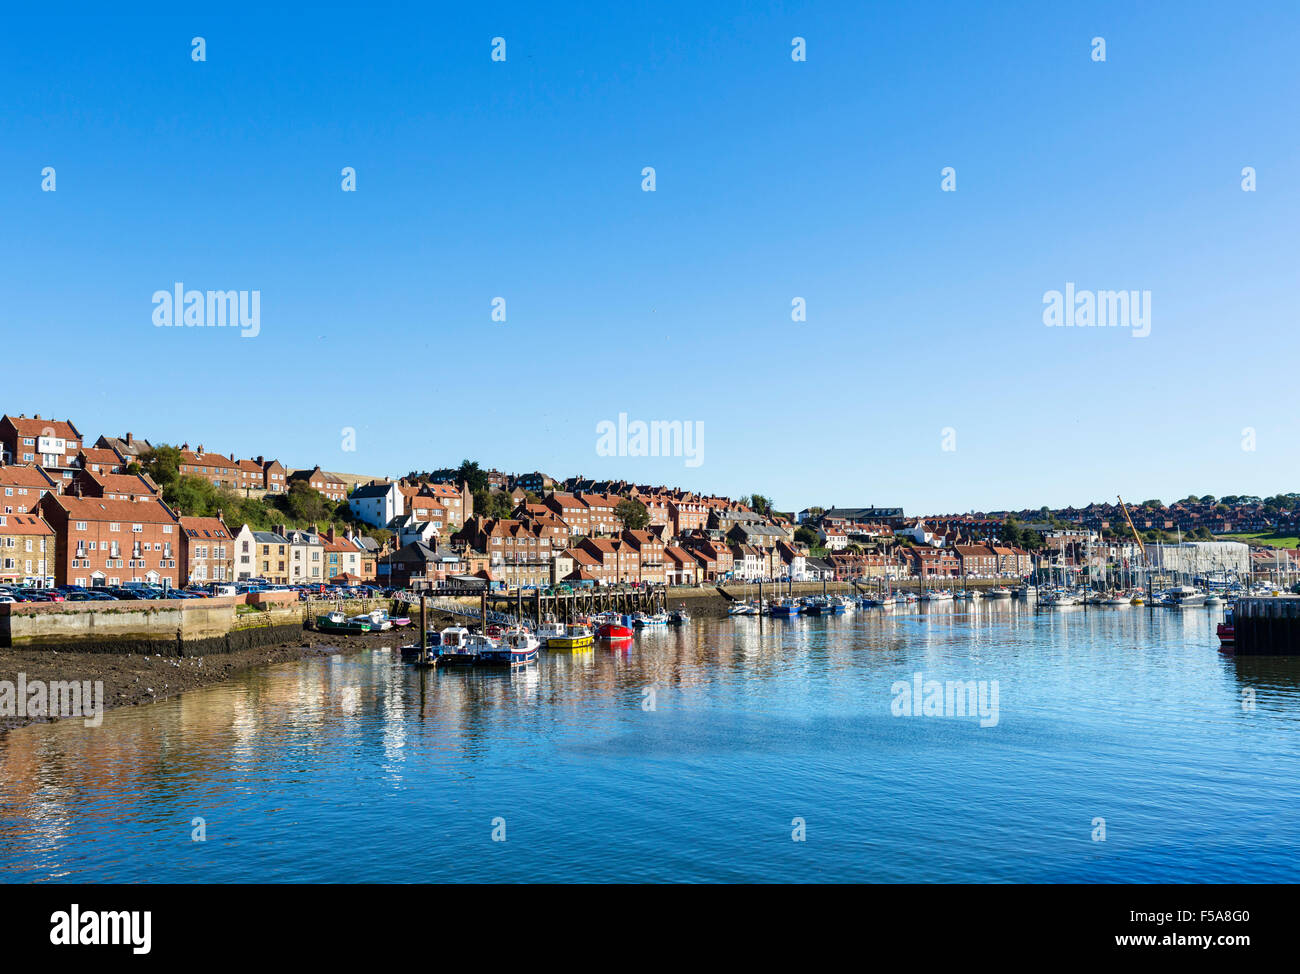 Boats moored on the River Esk in Whitby, North Yorkshire, England, UK Stock Photo